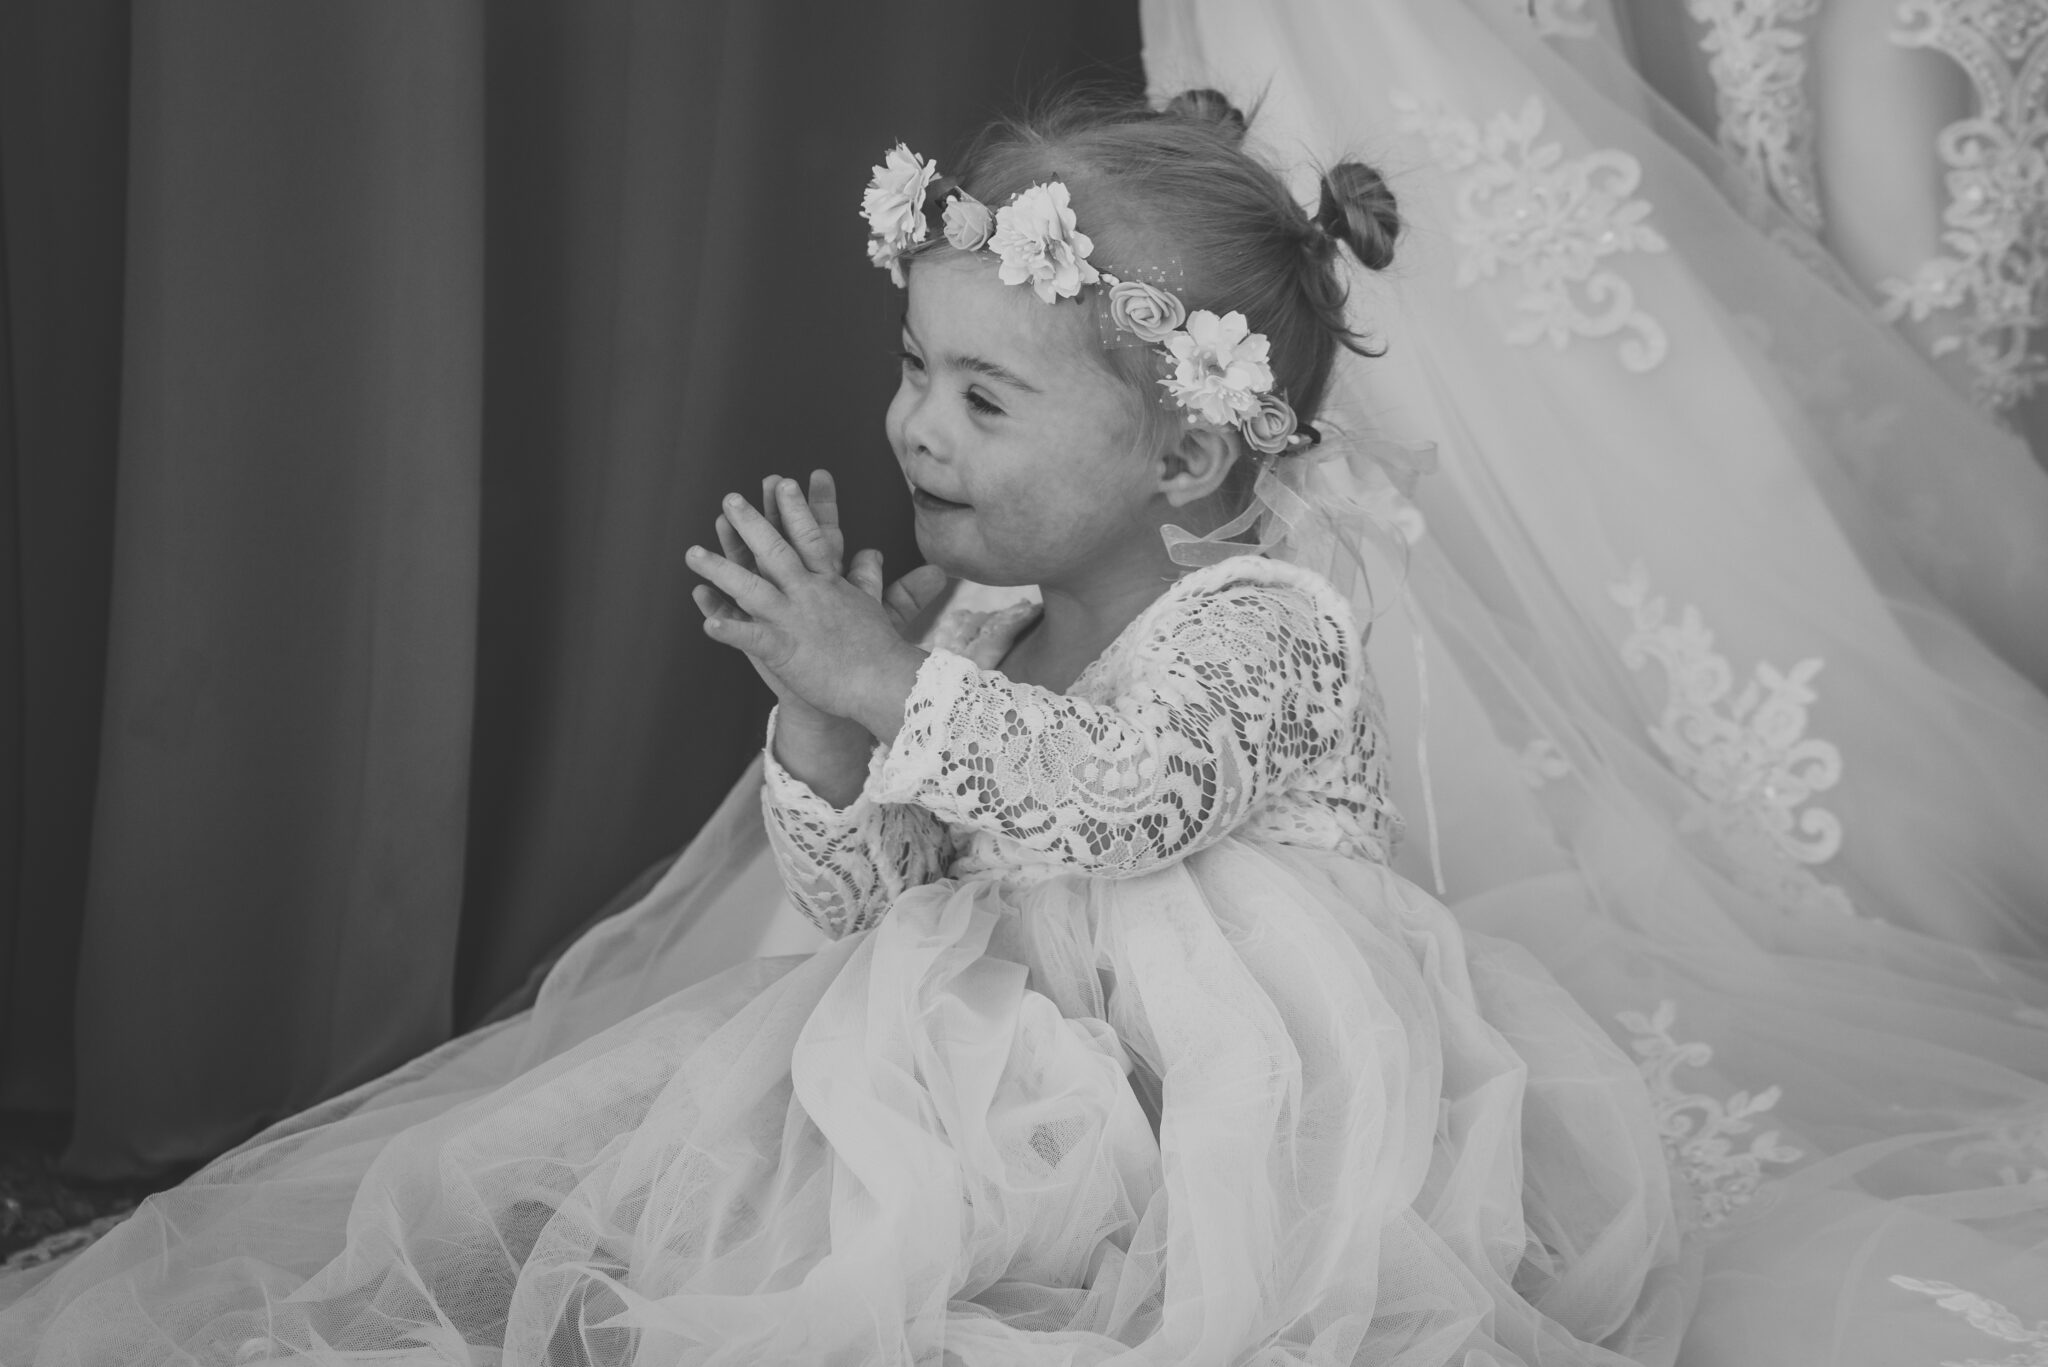 Black and white photo of a small child in a flower crown and dress